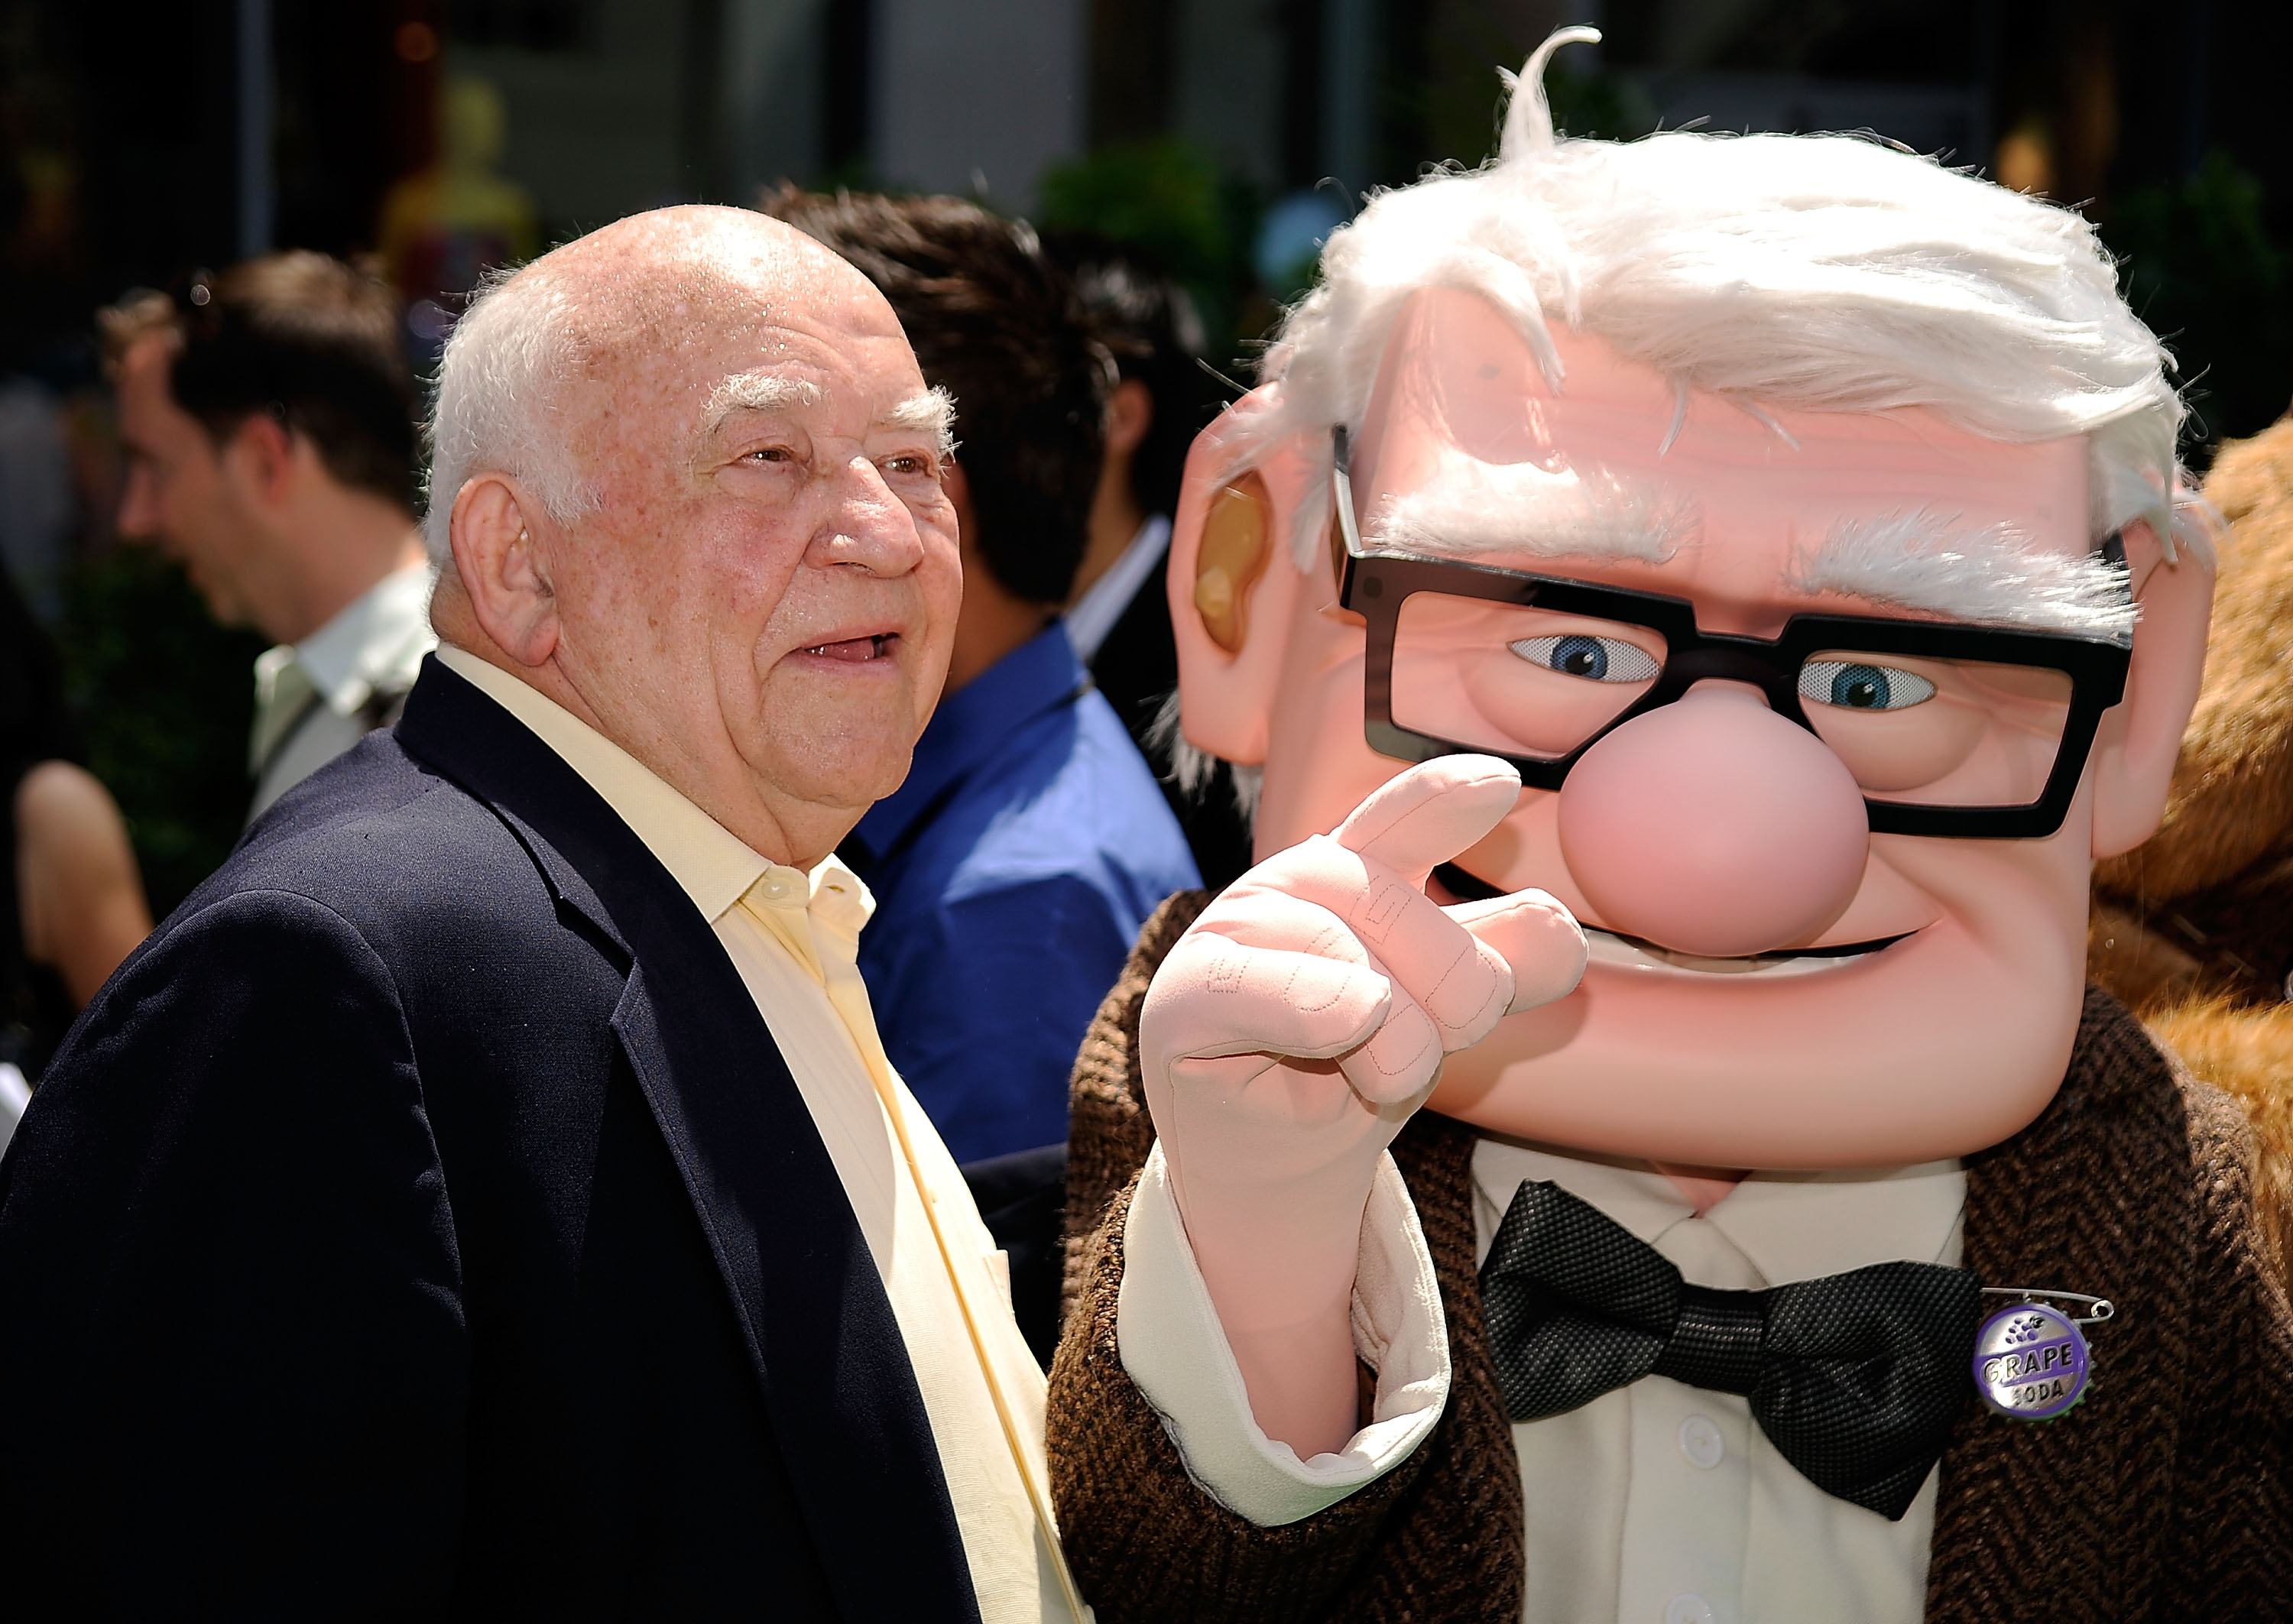 Ed Asner standing next to the character he voiced in the movie 'Up'